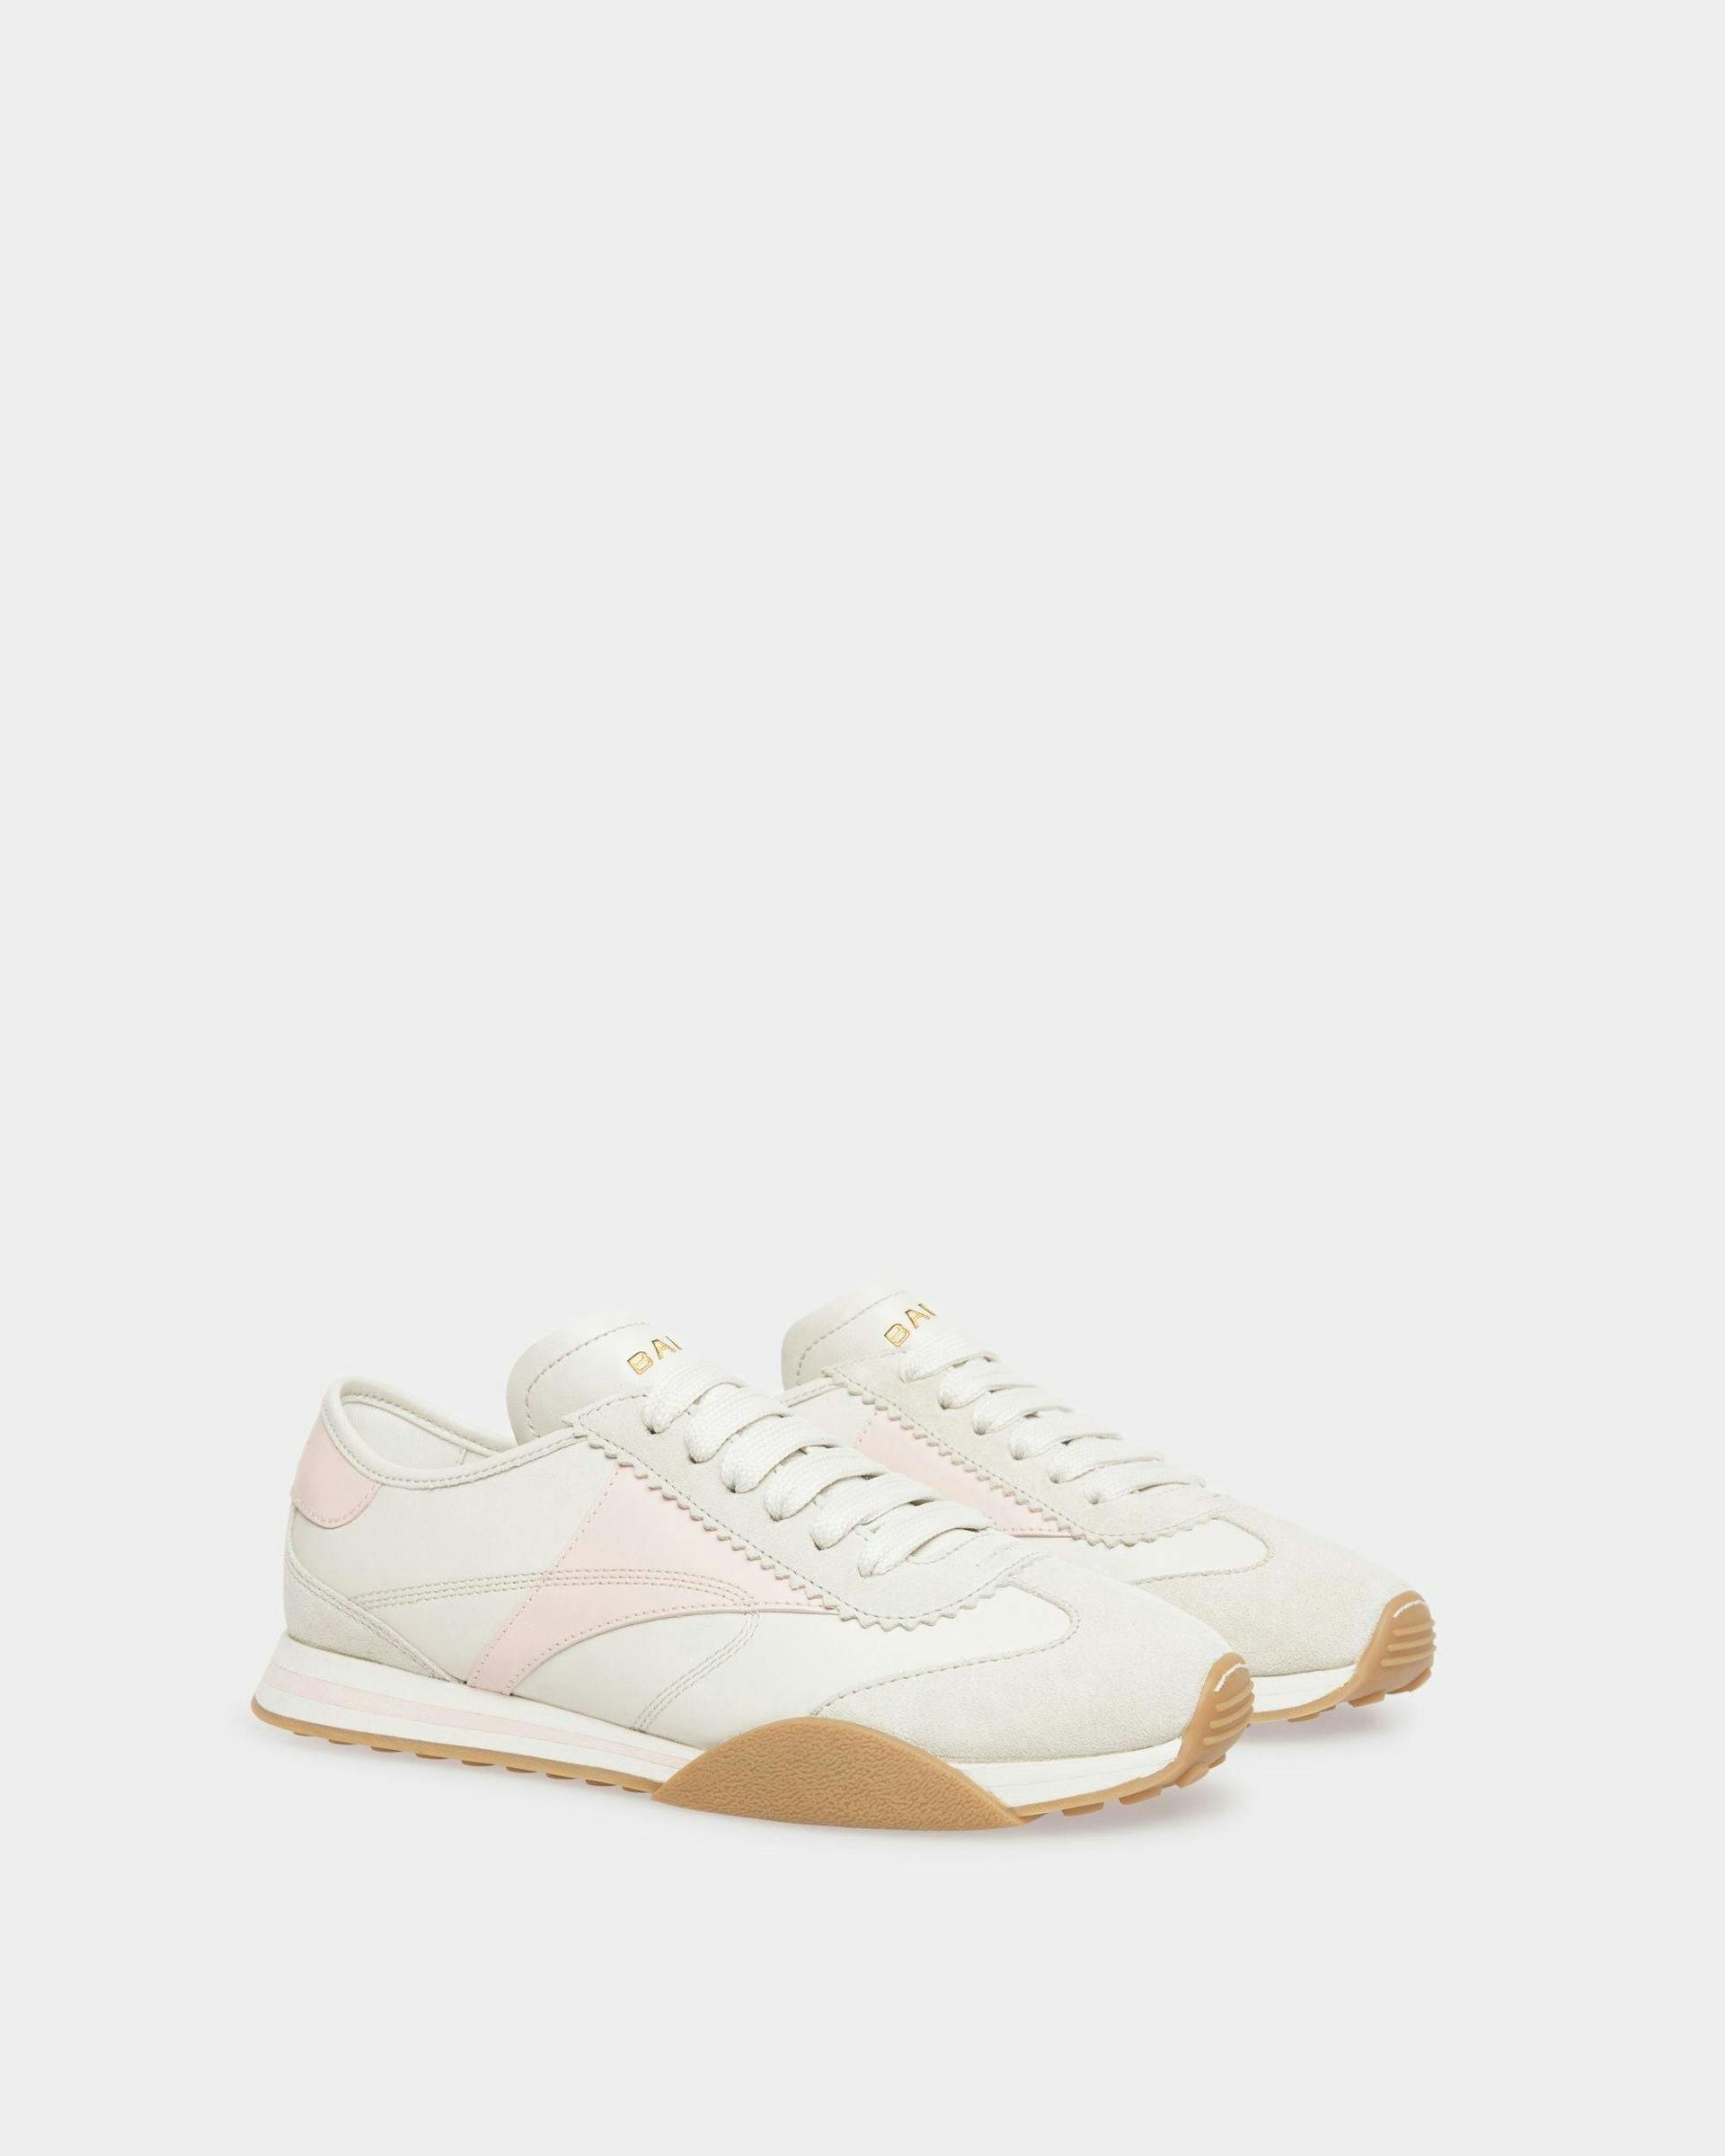 Sussex Sneakers In Dusty White And Rose Leather - Women's - Bally - 02